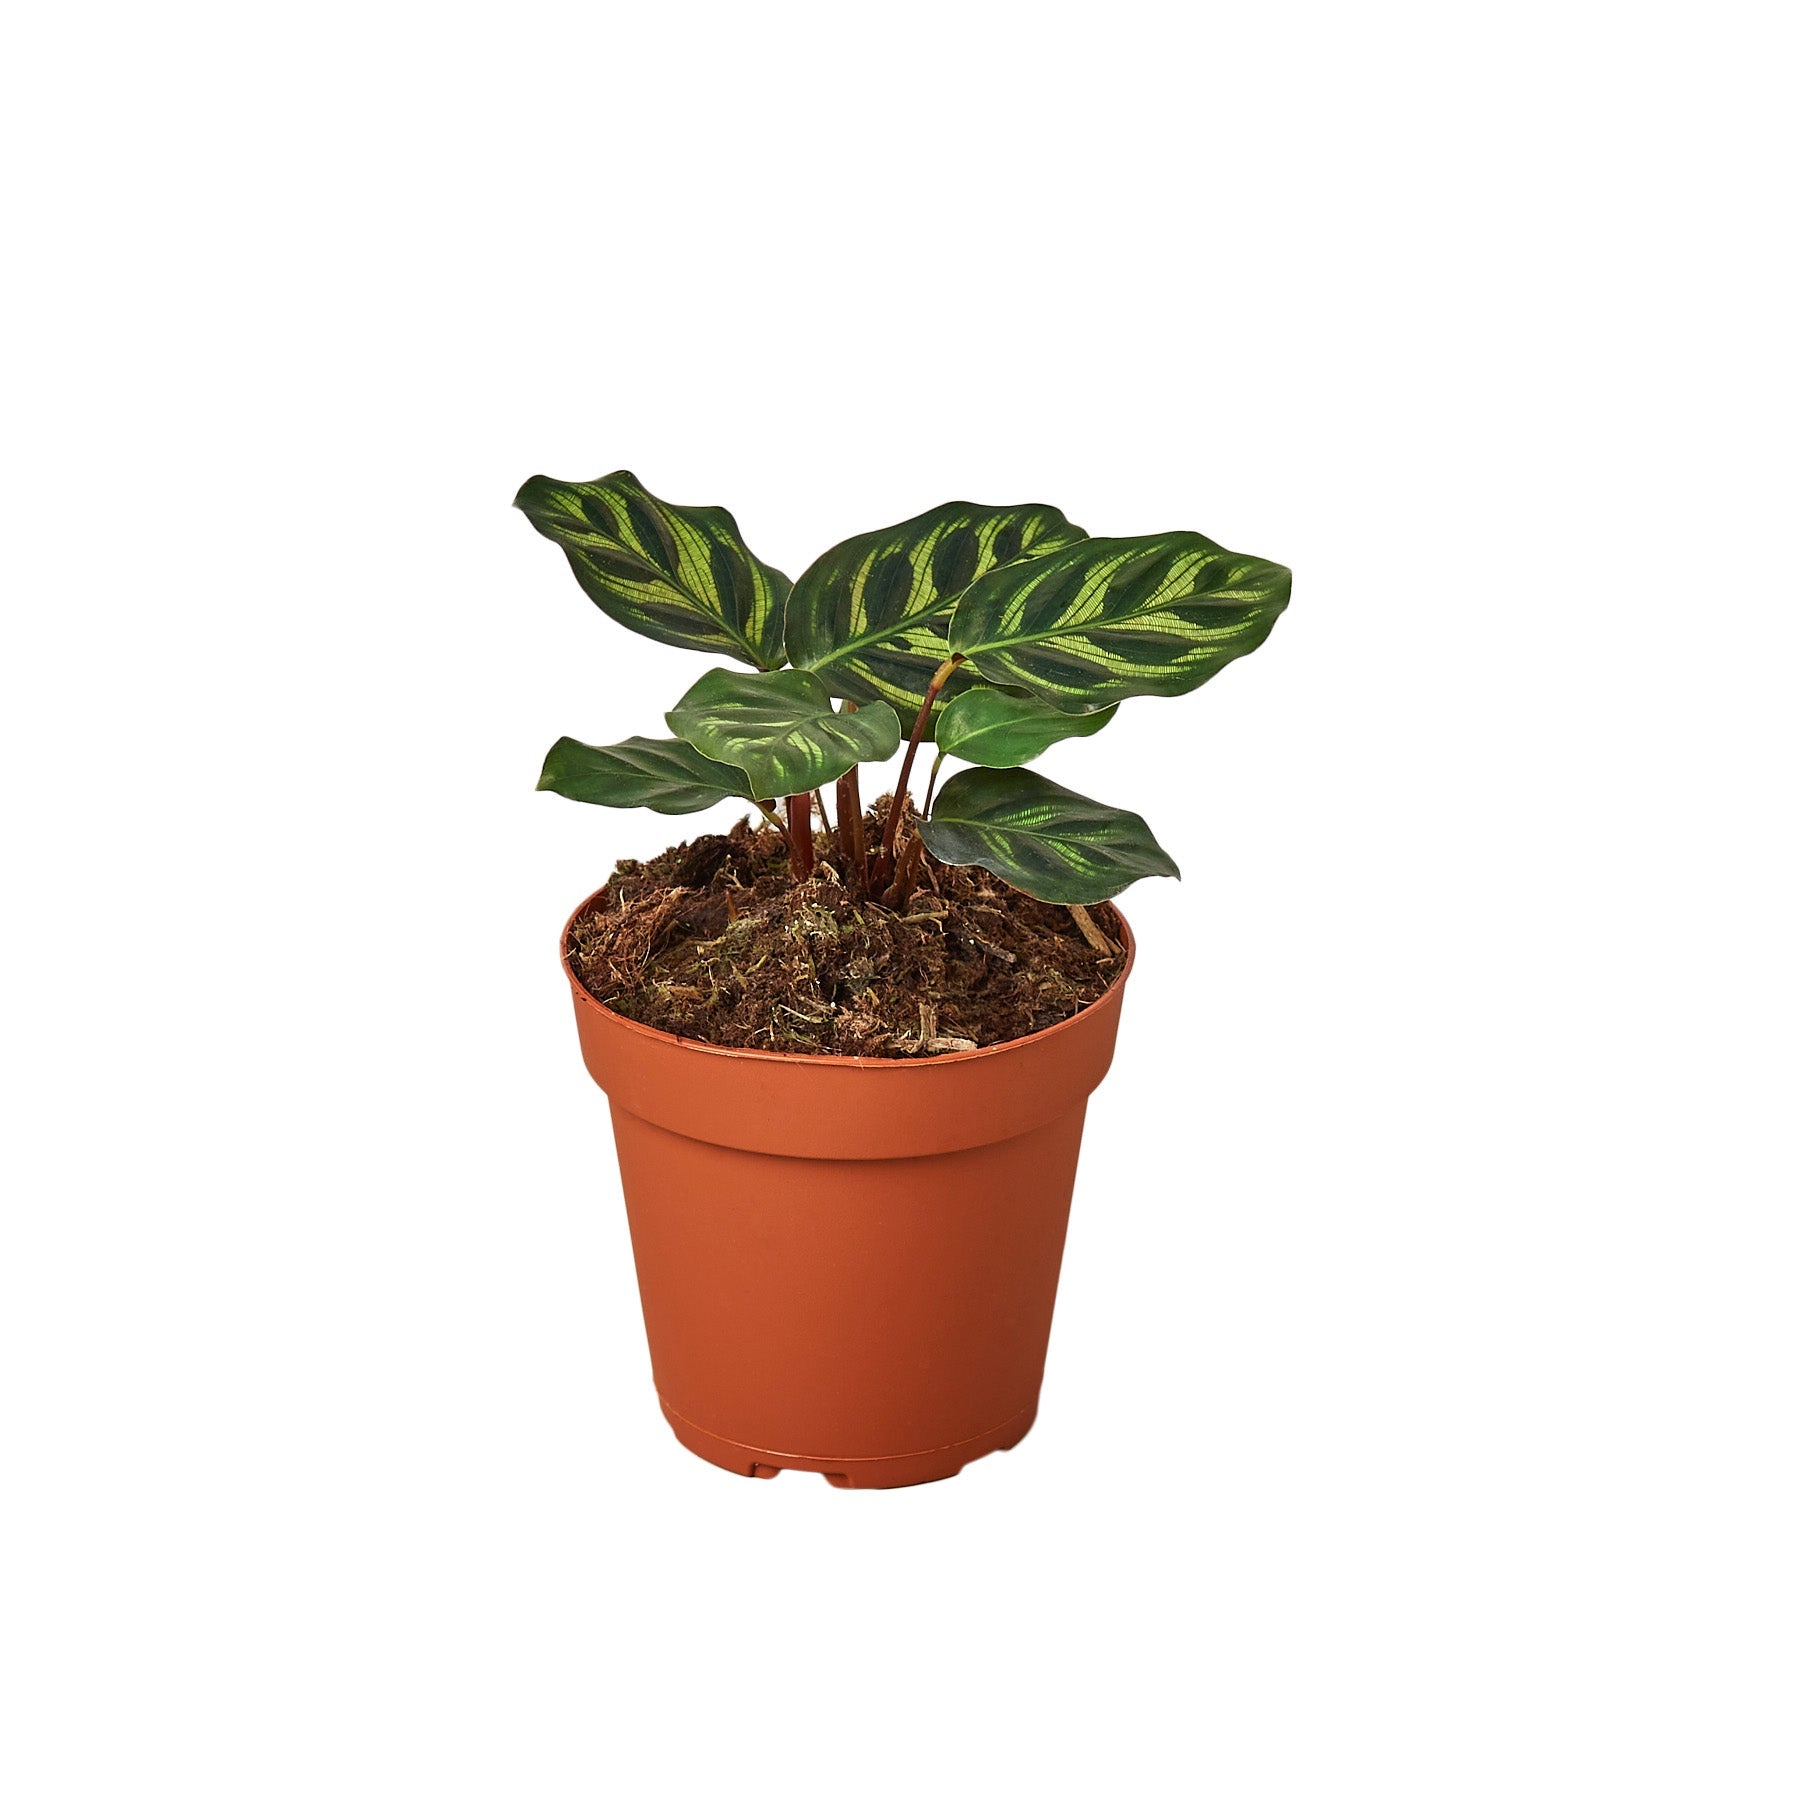 A small plant in a pot on a white background, available at the best plant nursery near me.